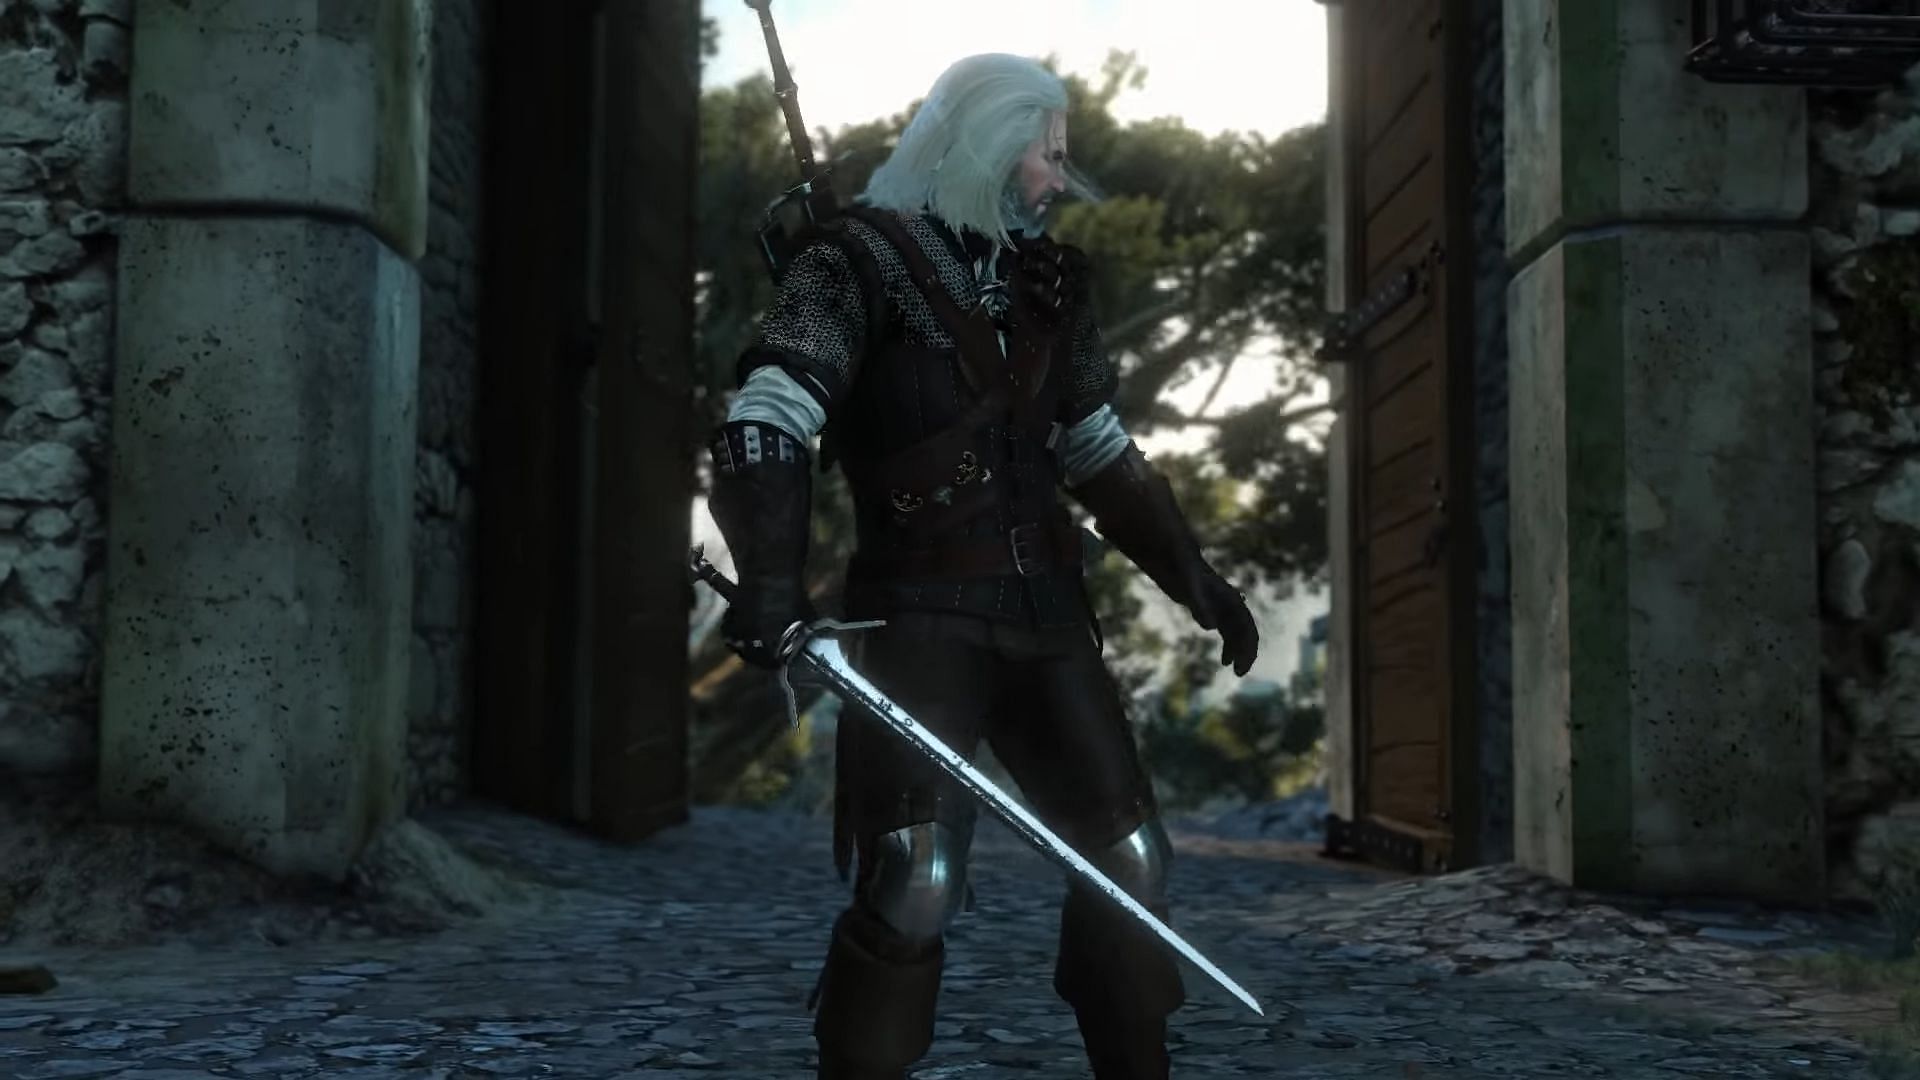 Legendary Manticore Armor in The Witcher 3 (Image via CD Projekt Red || xLetalis on YouTube)